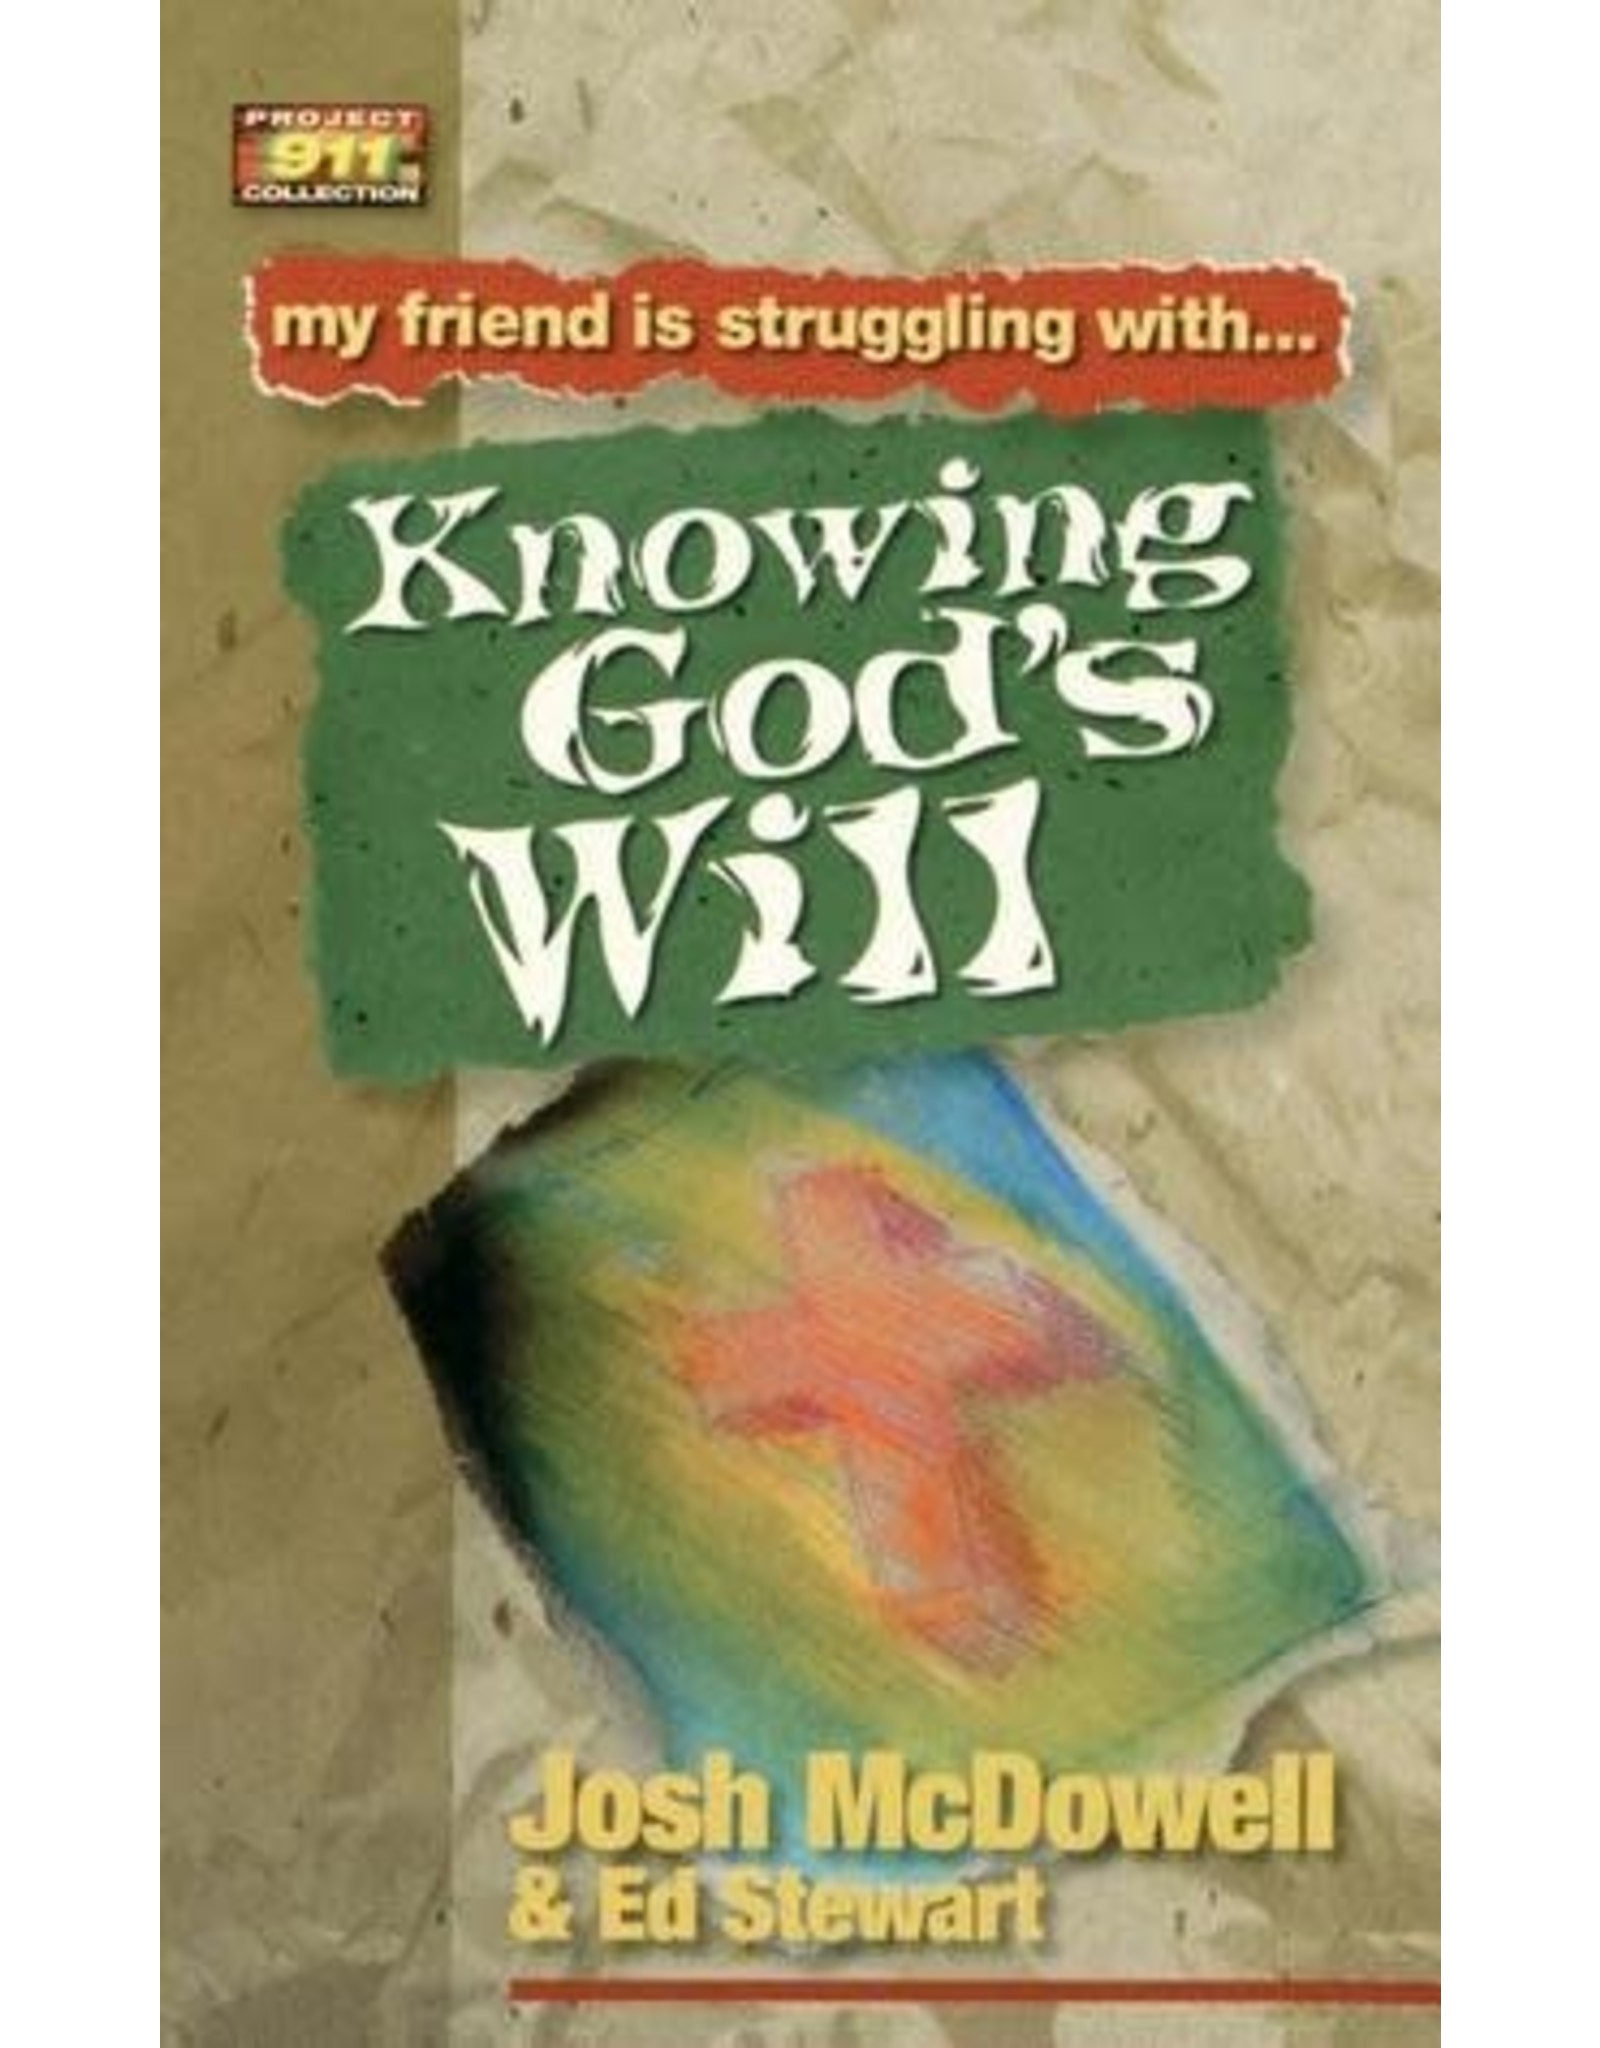 Josh McDowell & Ed Stewart My Friend is Struggling with Knowing God's Will